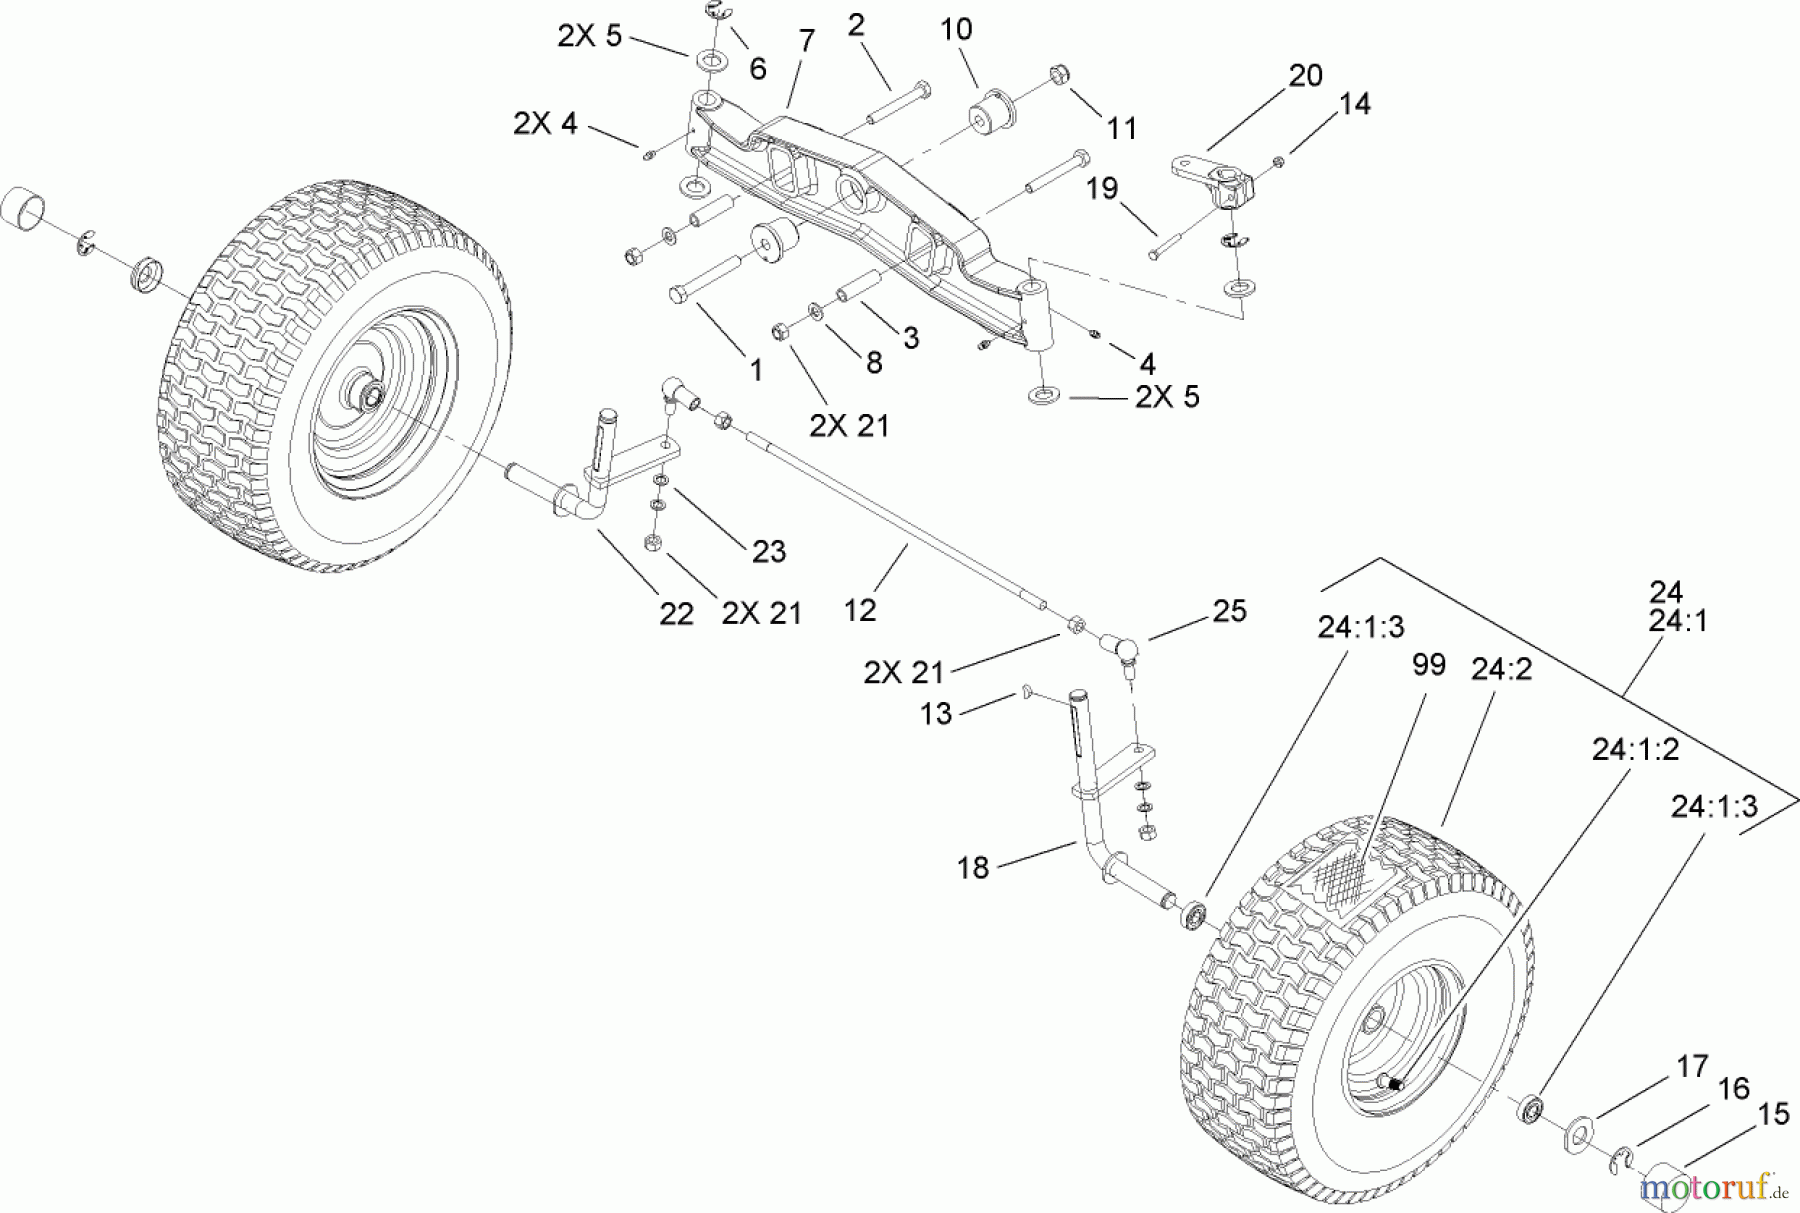  Toro Neu Mowers, Lawn & Garden Tractor Seite 1 74573 (DH 200) - Toro DH 200 Lawn Tractor, 2009 (290000001-290000480) FRONT AXLE ASSEMBLY